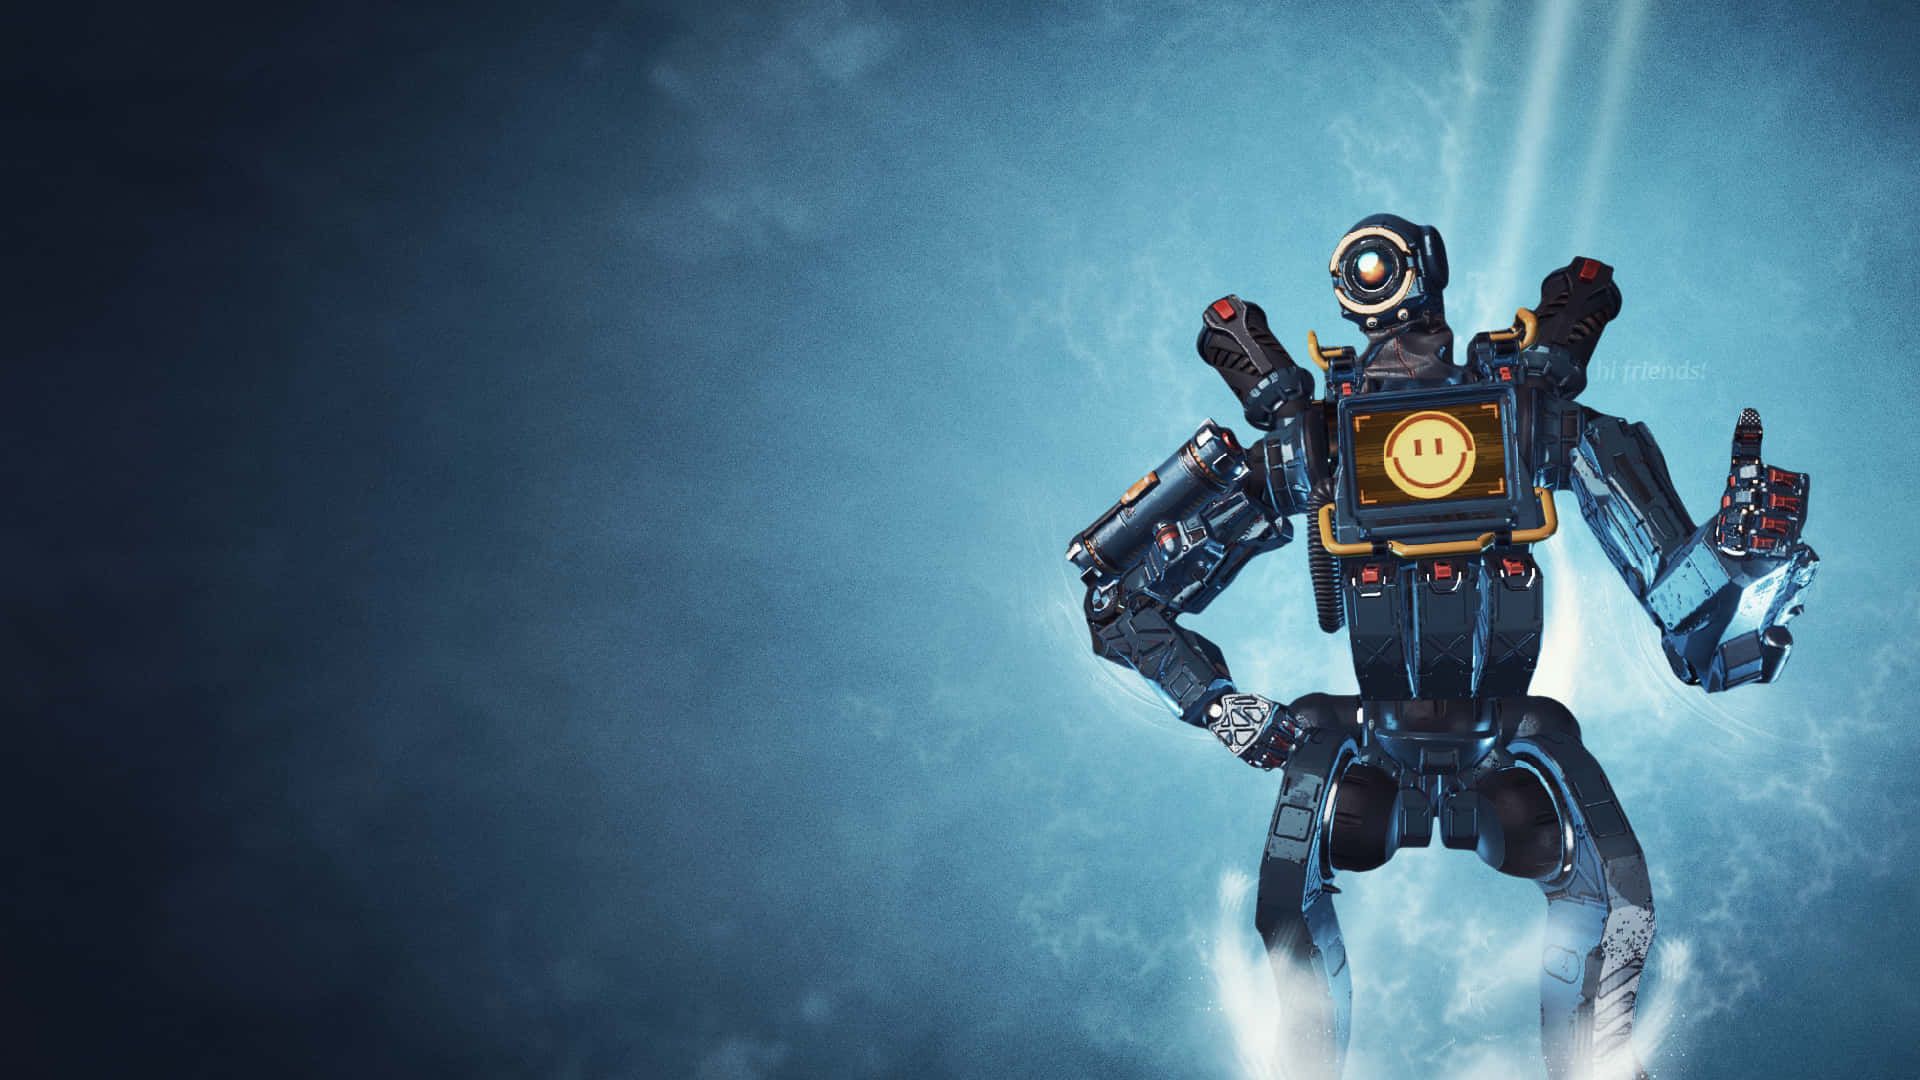 Get the competitive edge in Apex Legends with the Pathfinder. Wallpaper